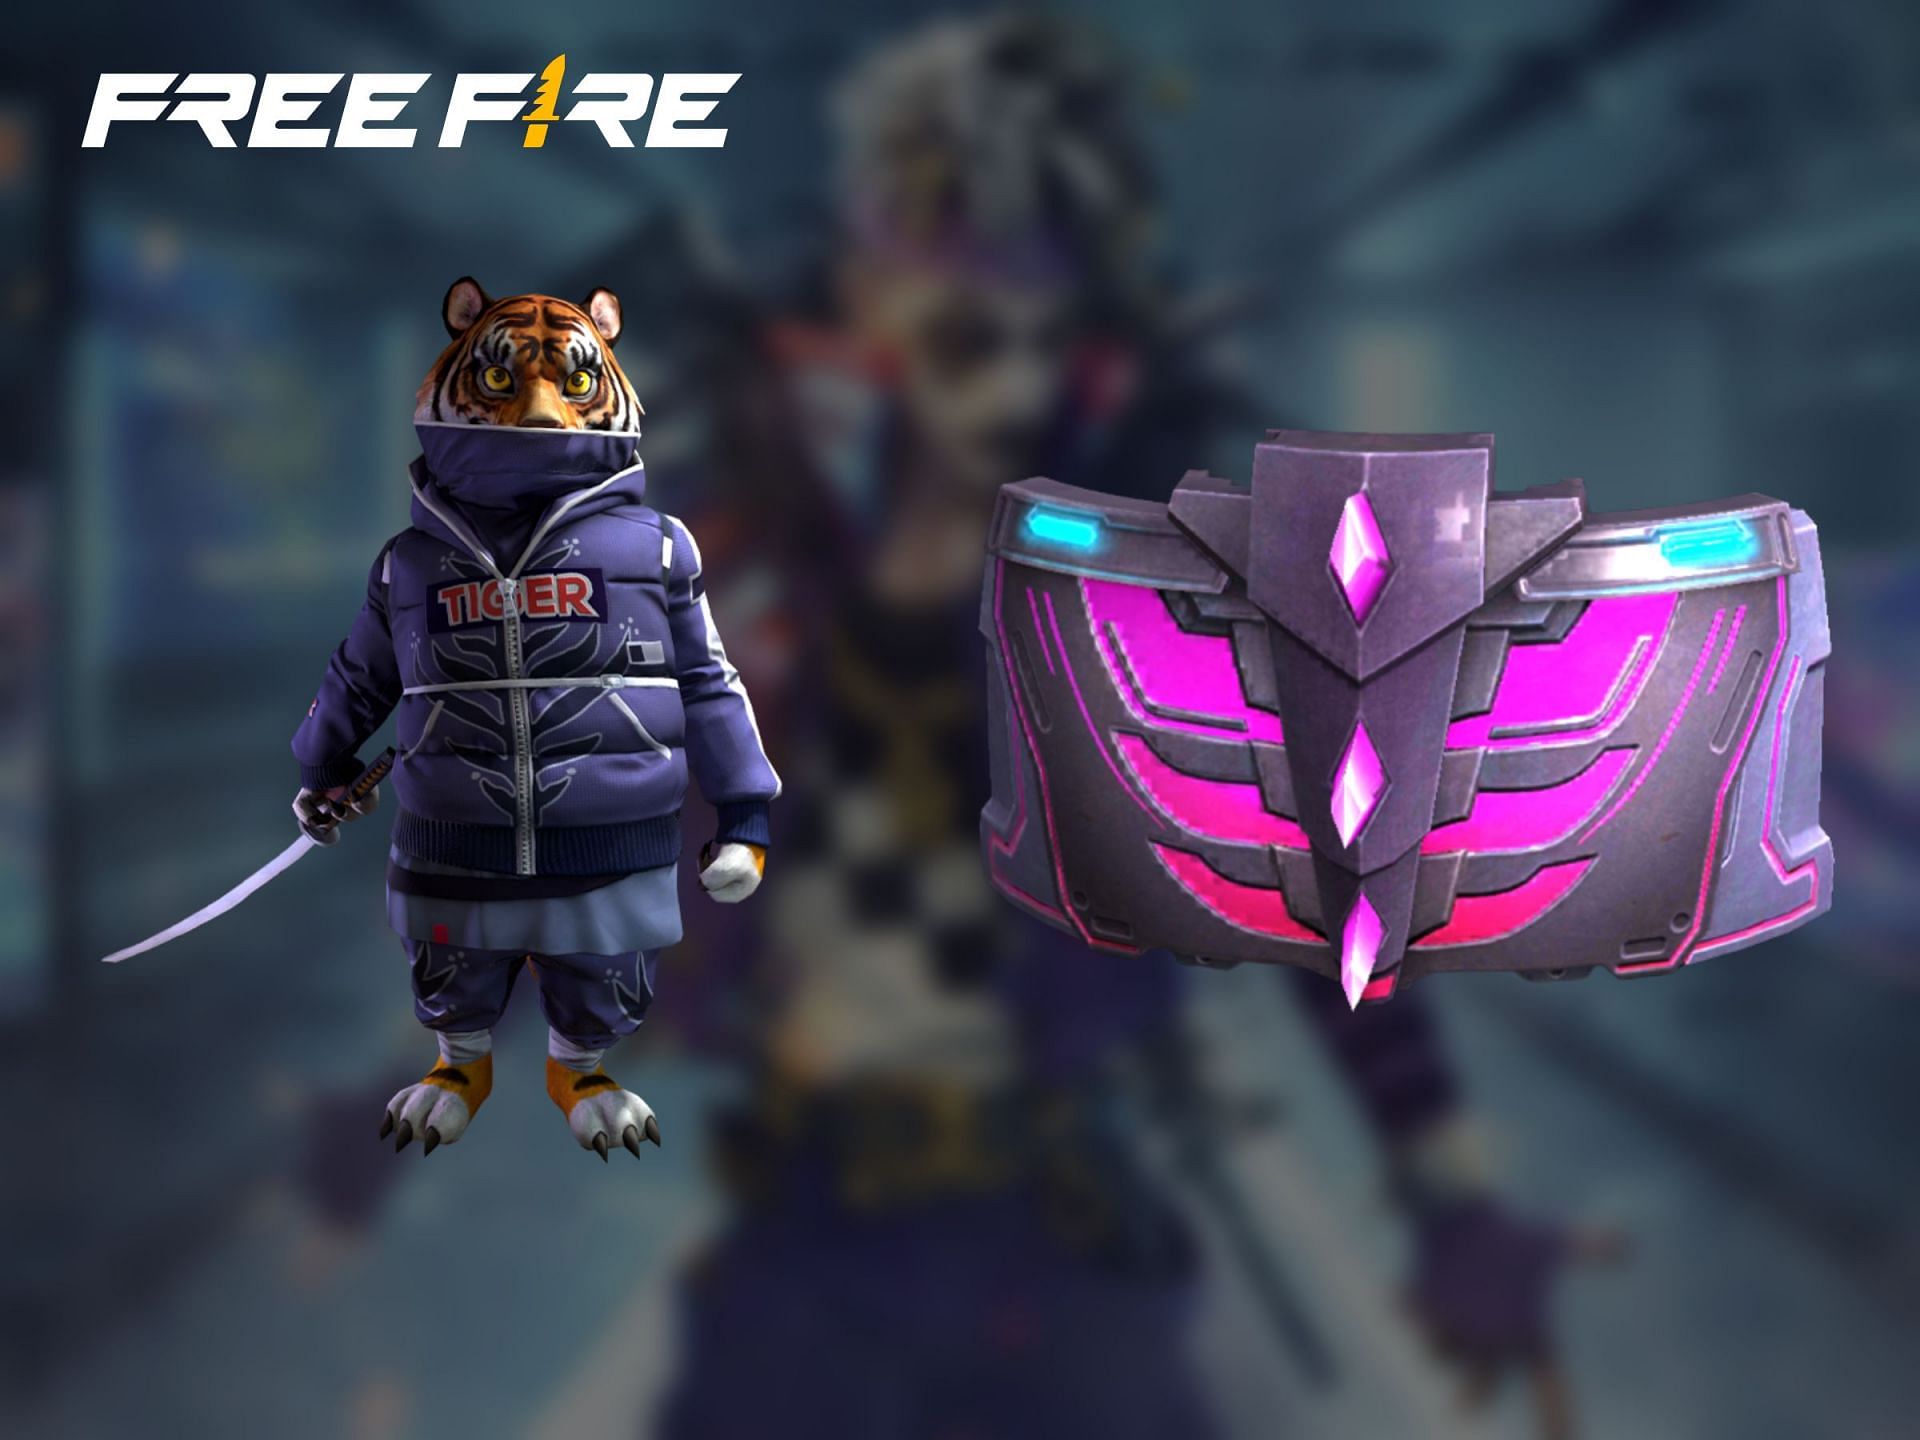 Free Fire redeem codes can offer free pets and gloo wall skins in the game (Image via Sportskeeda)